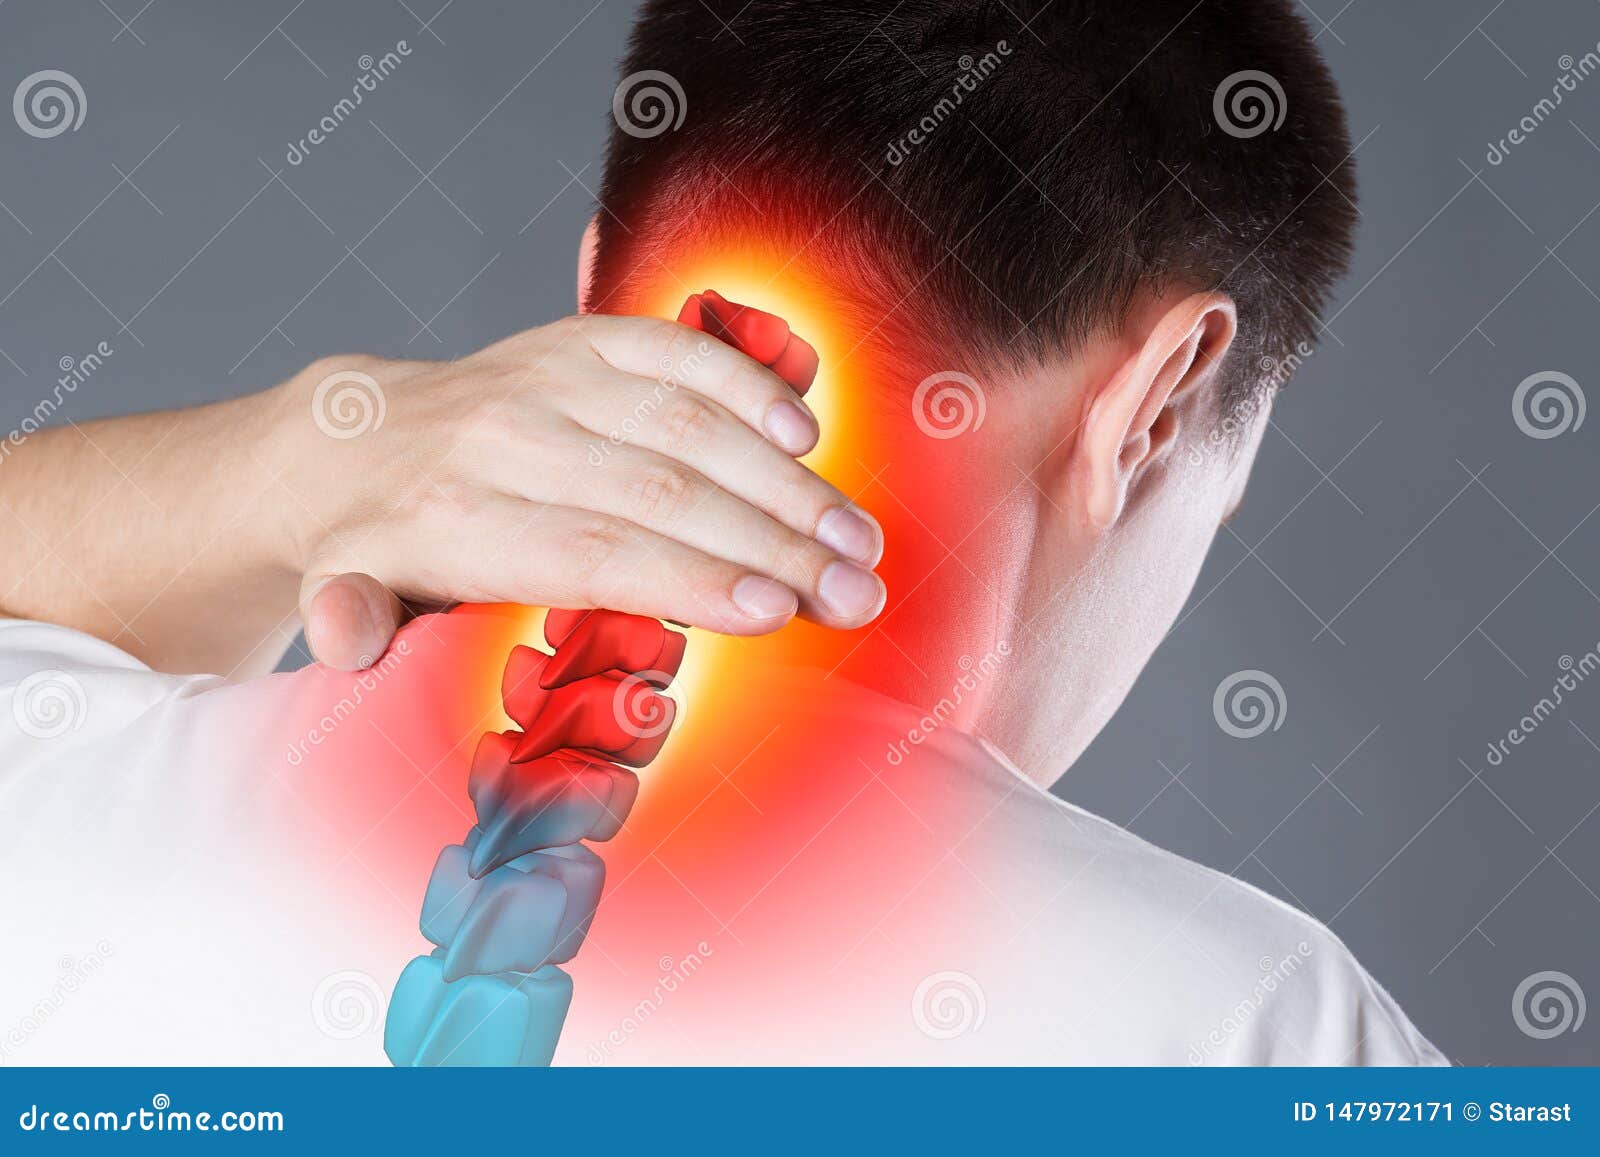 pain in the spine, a man with backache, injury in the human neck, chiropractic treatments concept